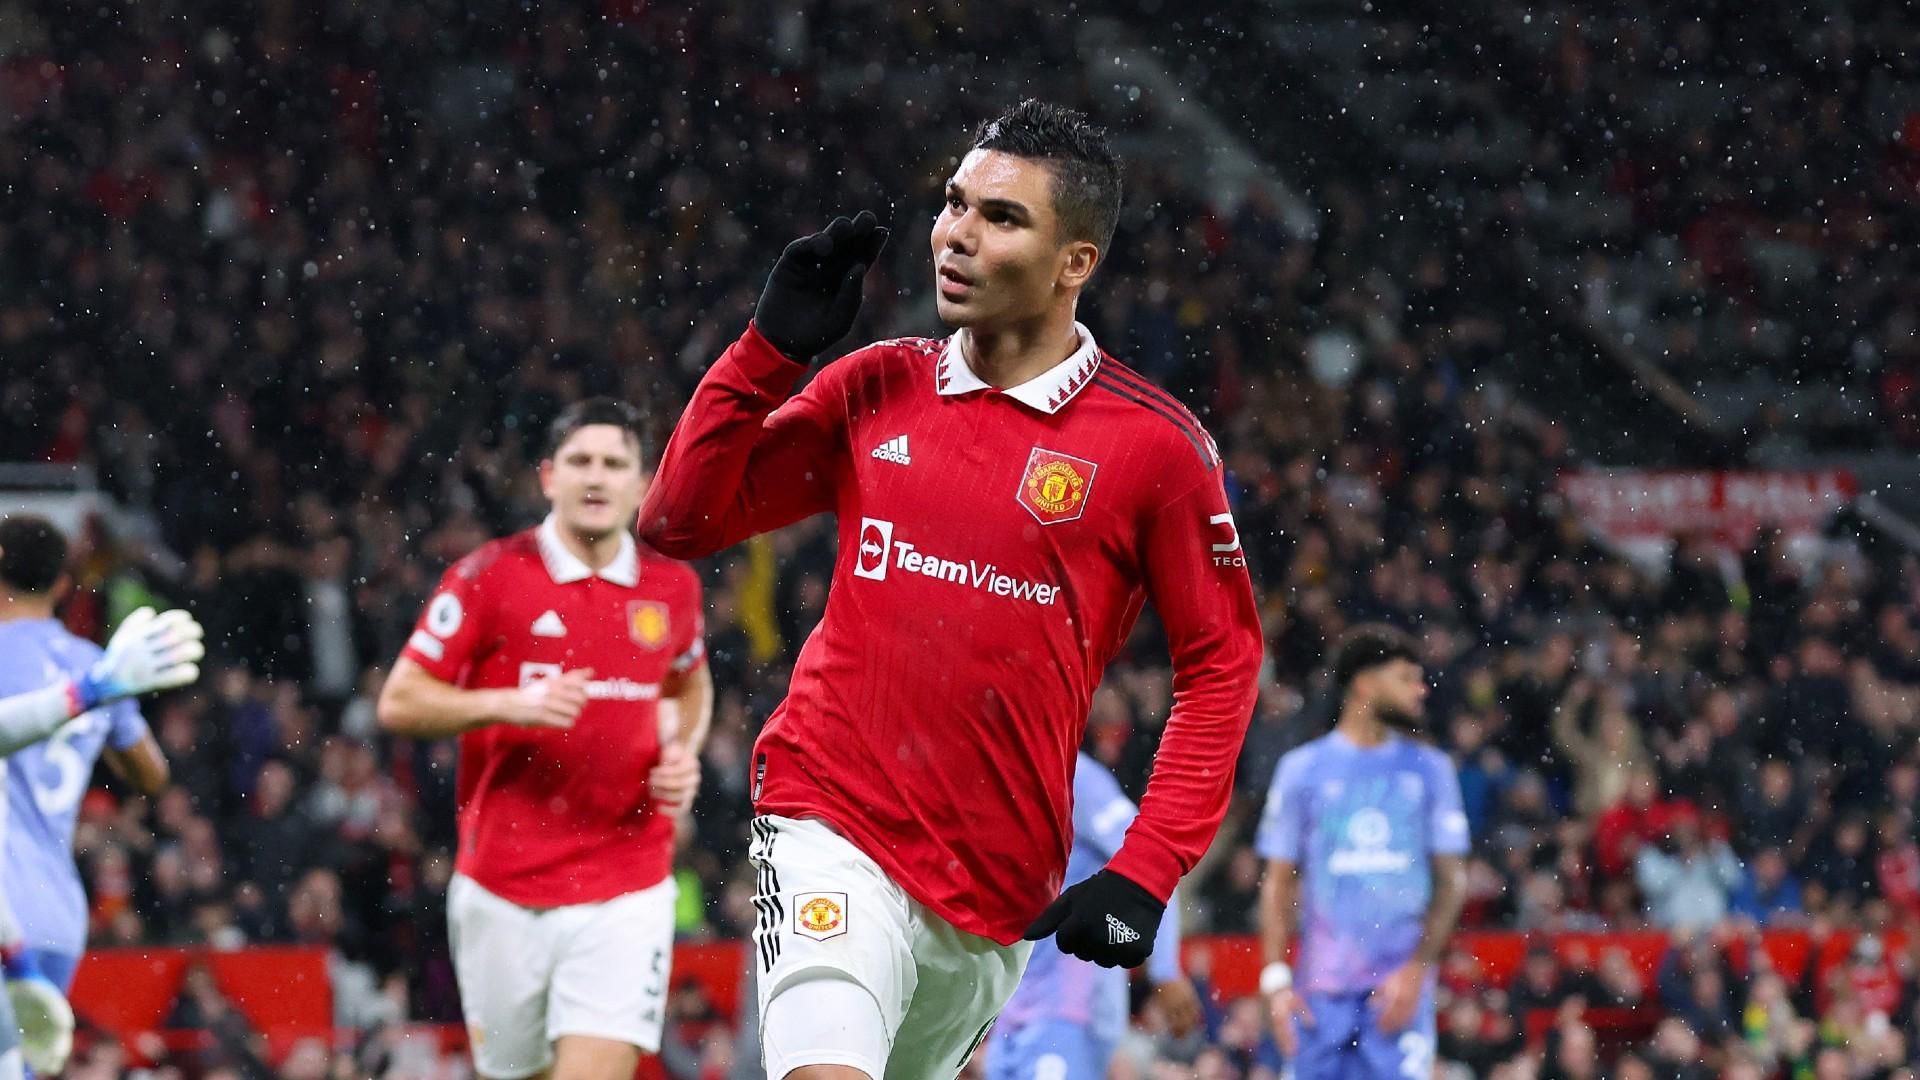 Casemiro has improved Manchester United's midfield since arriving from Real Madrid